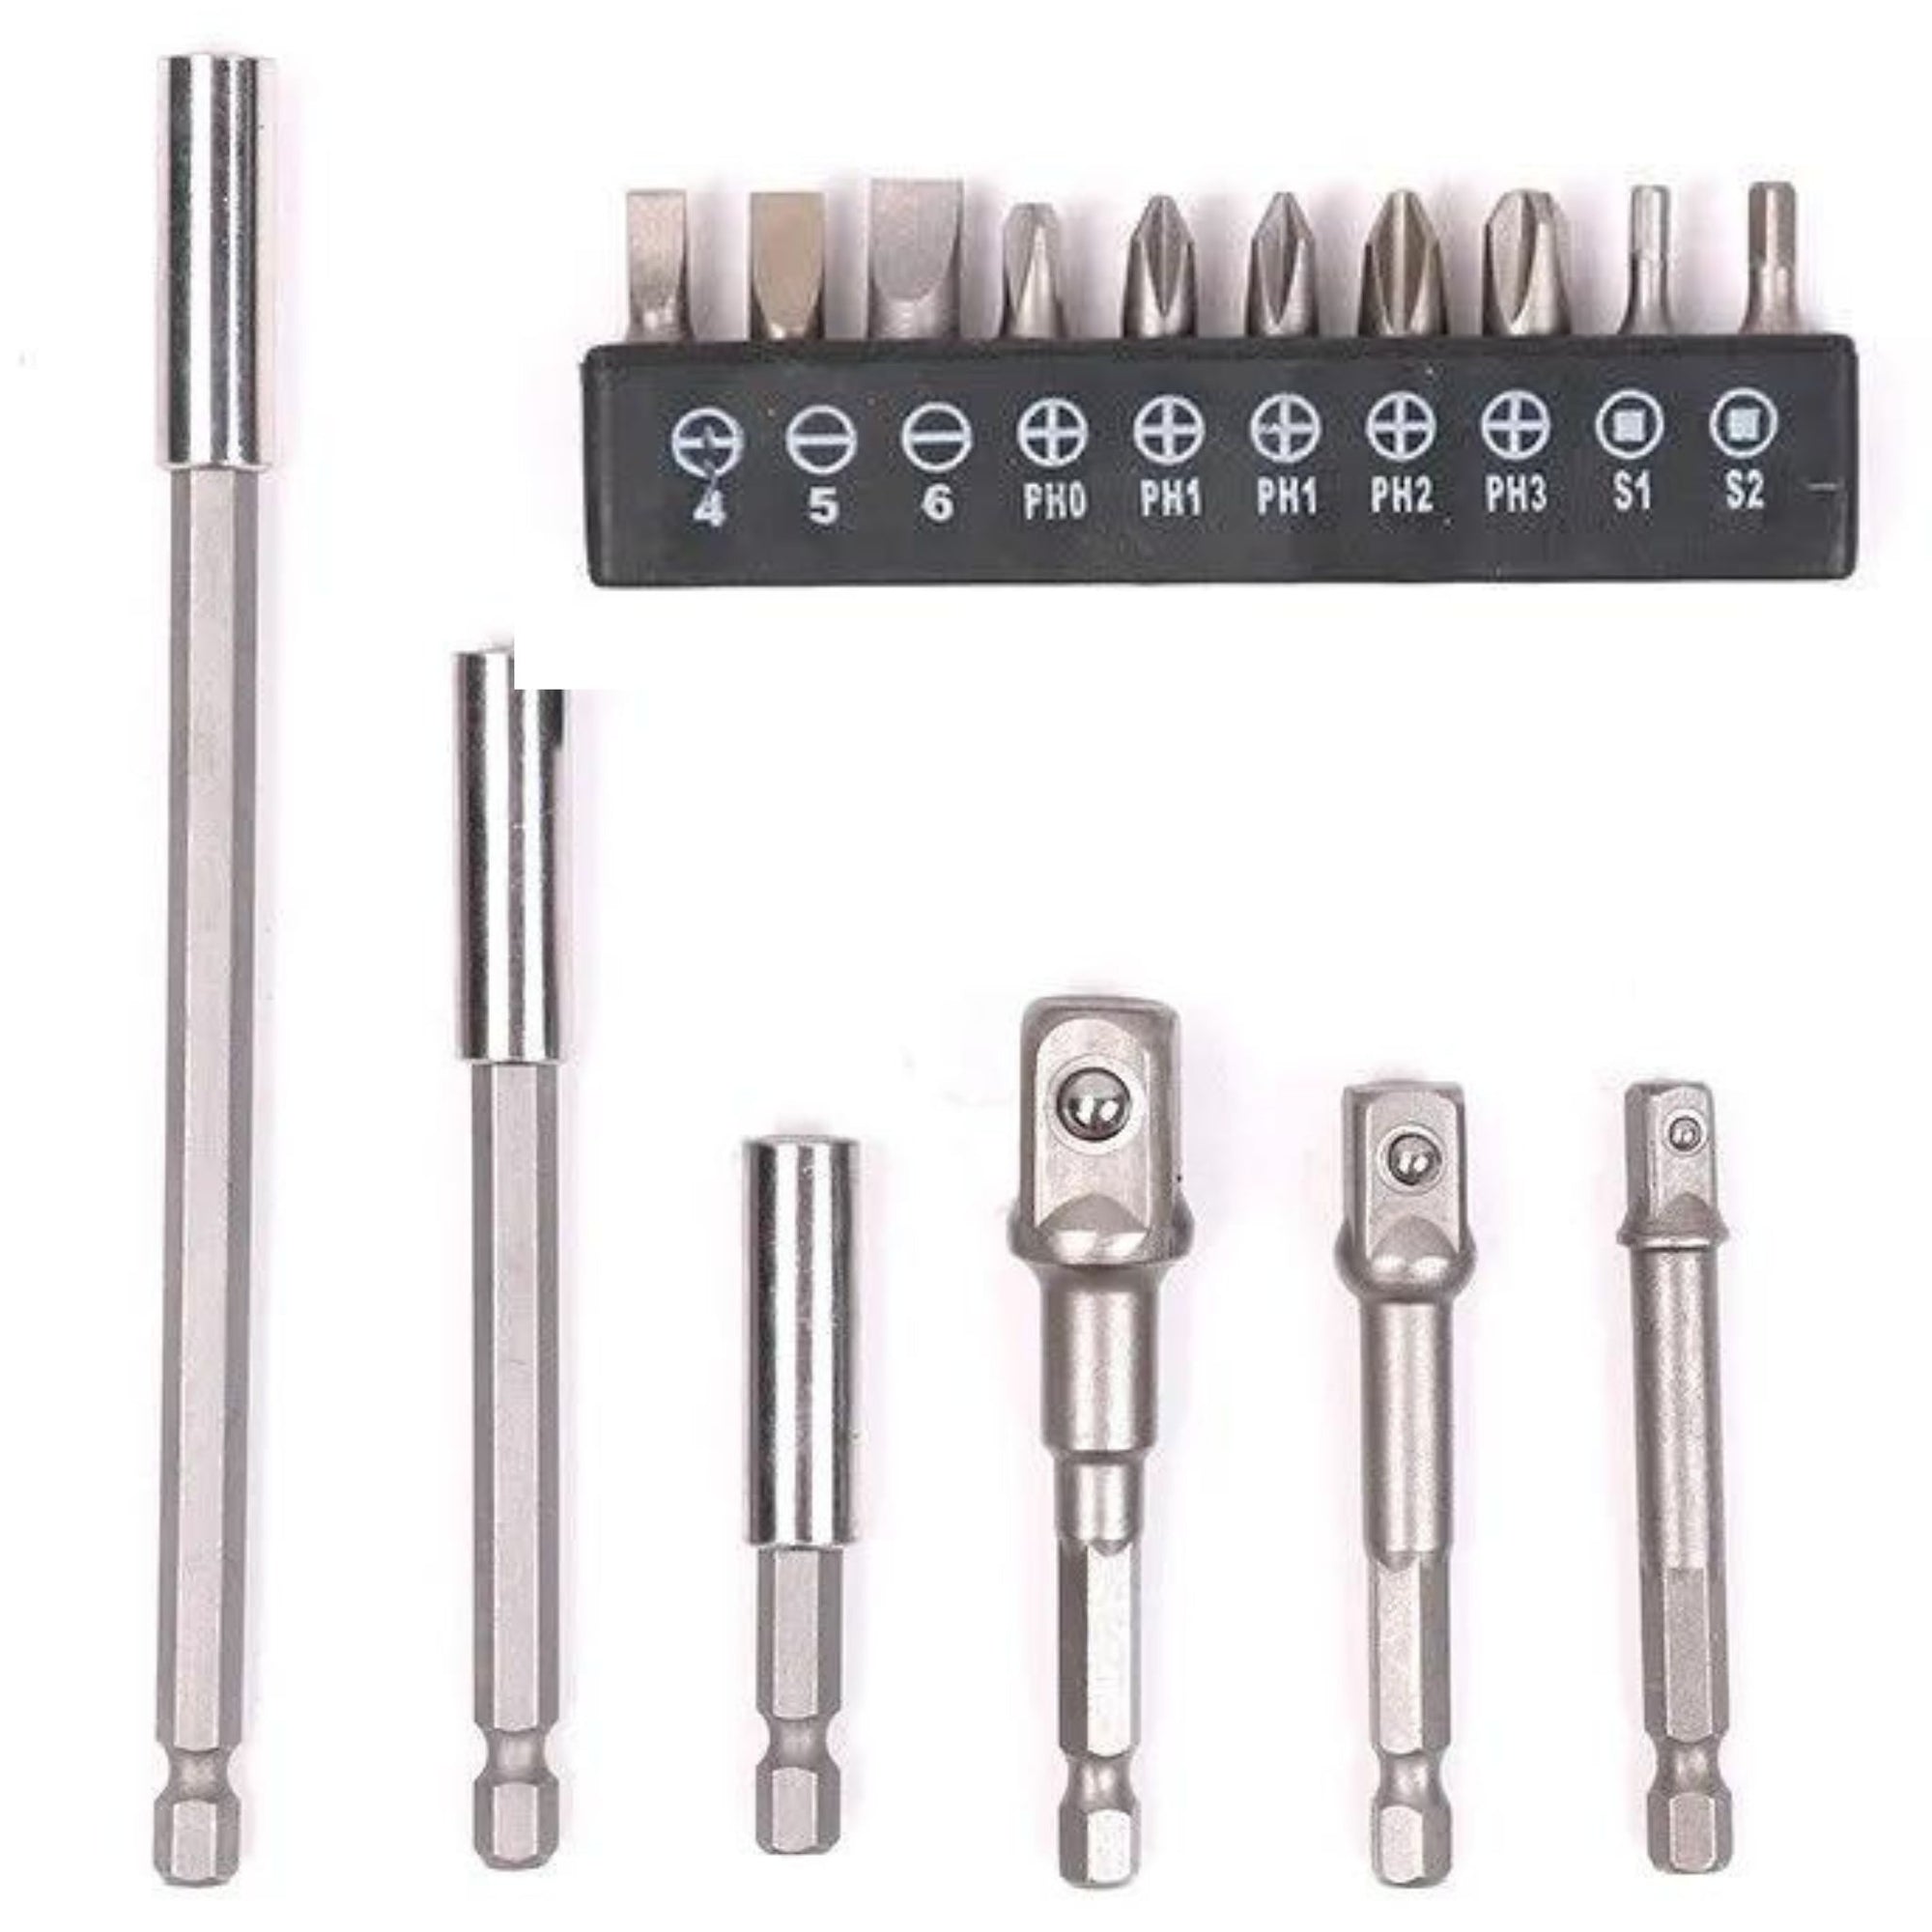 16 piece Socket Adapter & Hex Shank Set - South East Clearance Centre